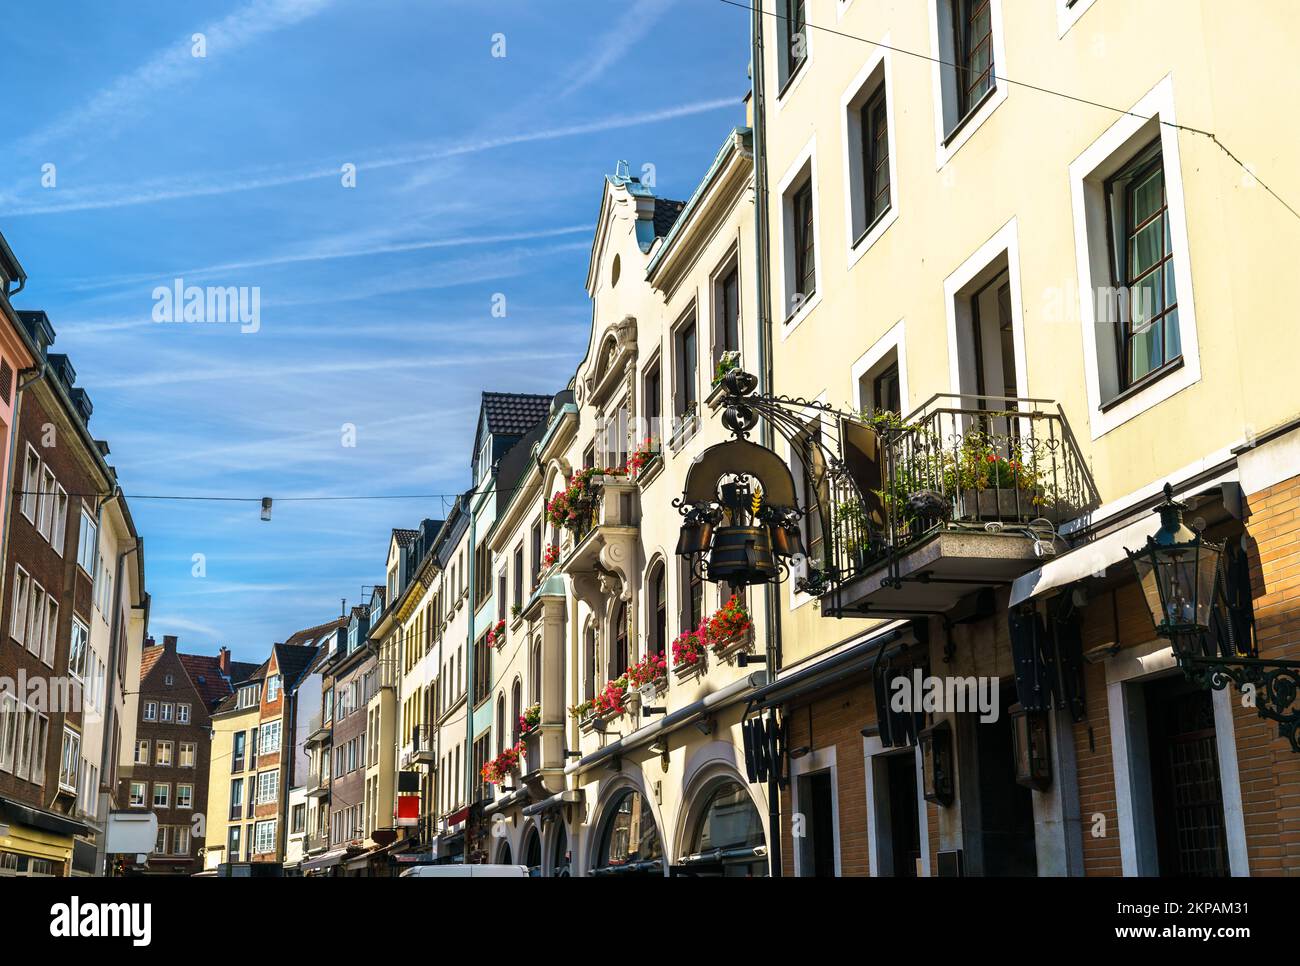 One of the main streets in the Old city center of Dusseldorf in Germany Stock Photo